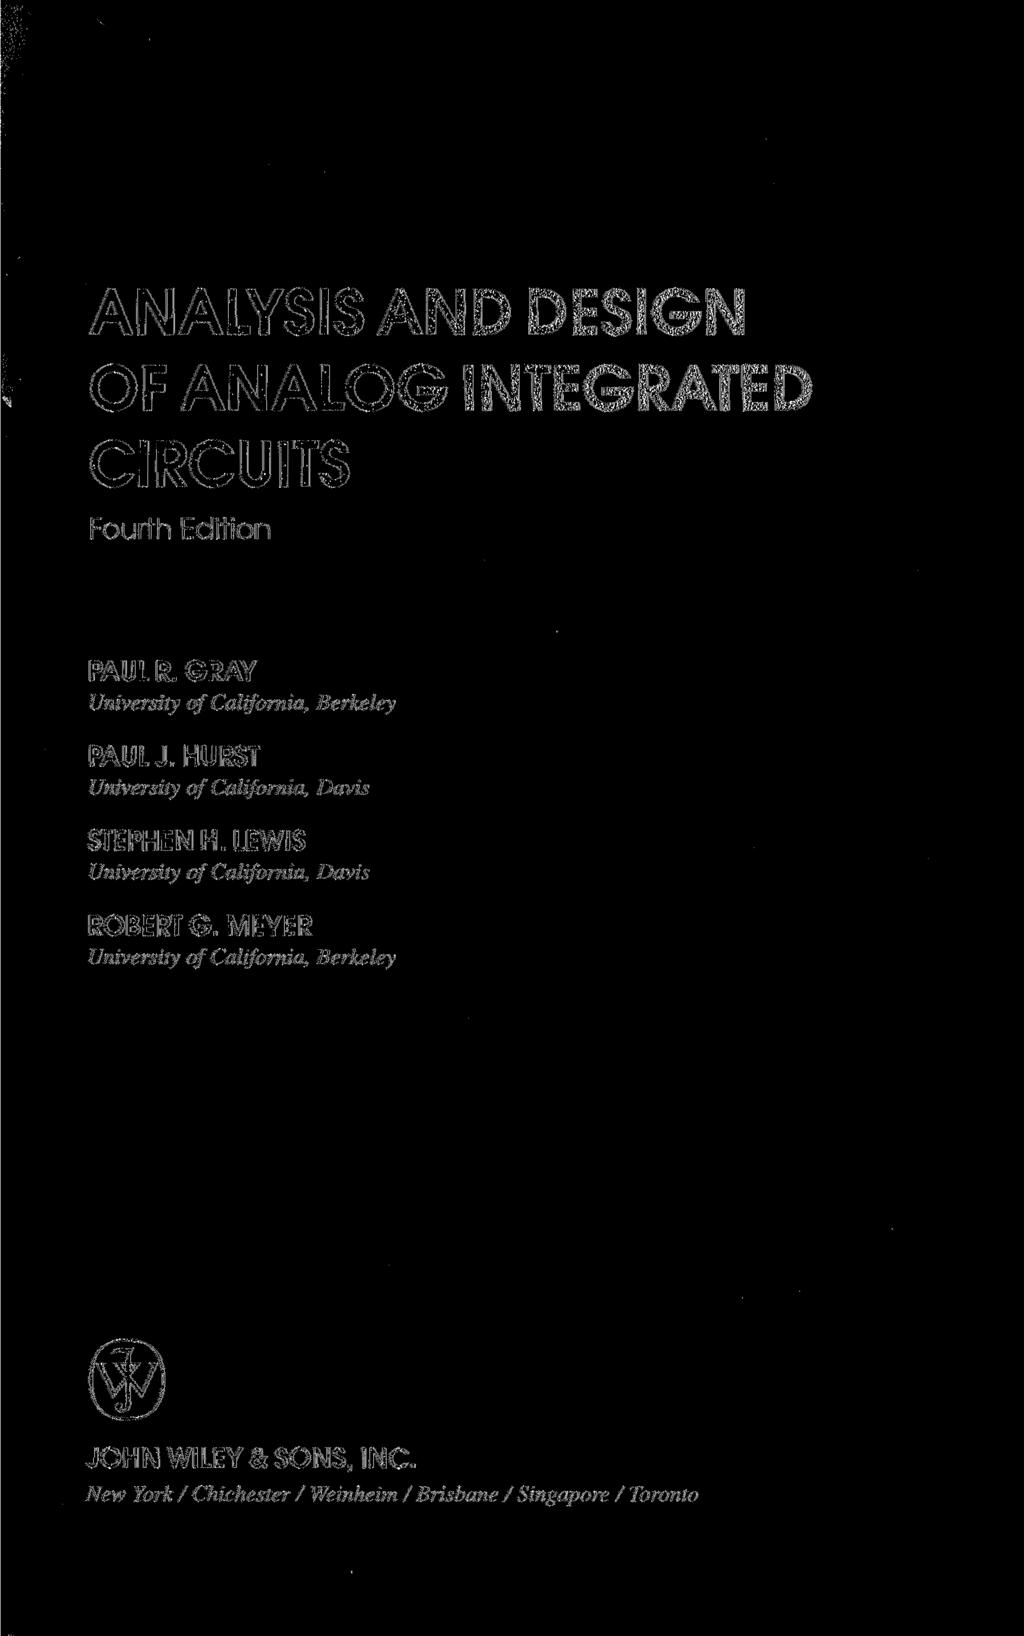 ANALYSIS AND DESIGN OF ANALOG INTEGRATED CIRCUITS Fourth Edition PAUL R. GRAY University of California, Berkeley PAUL J. HURST University of California, Davis STEPHEN H.